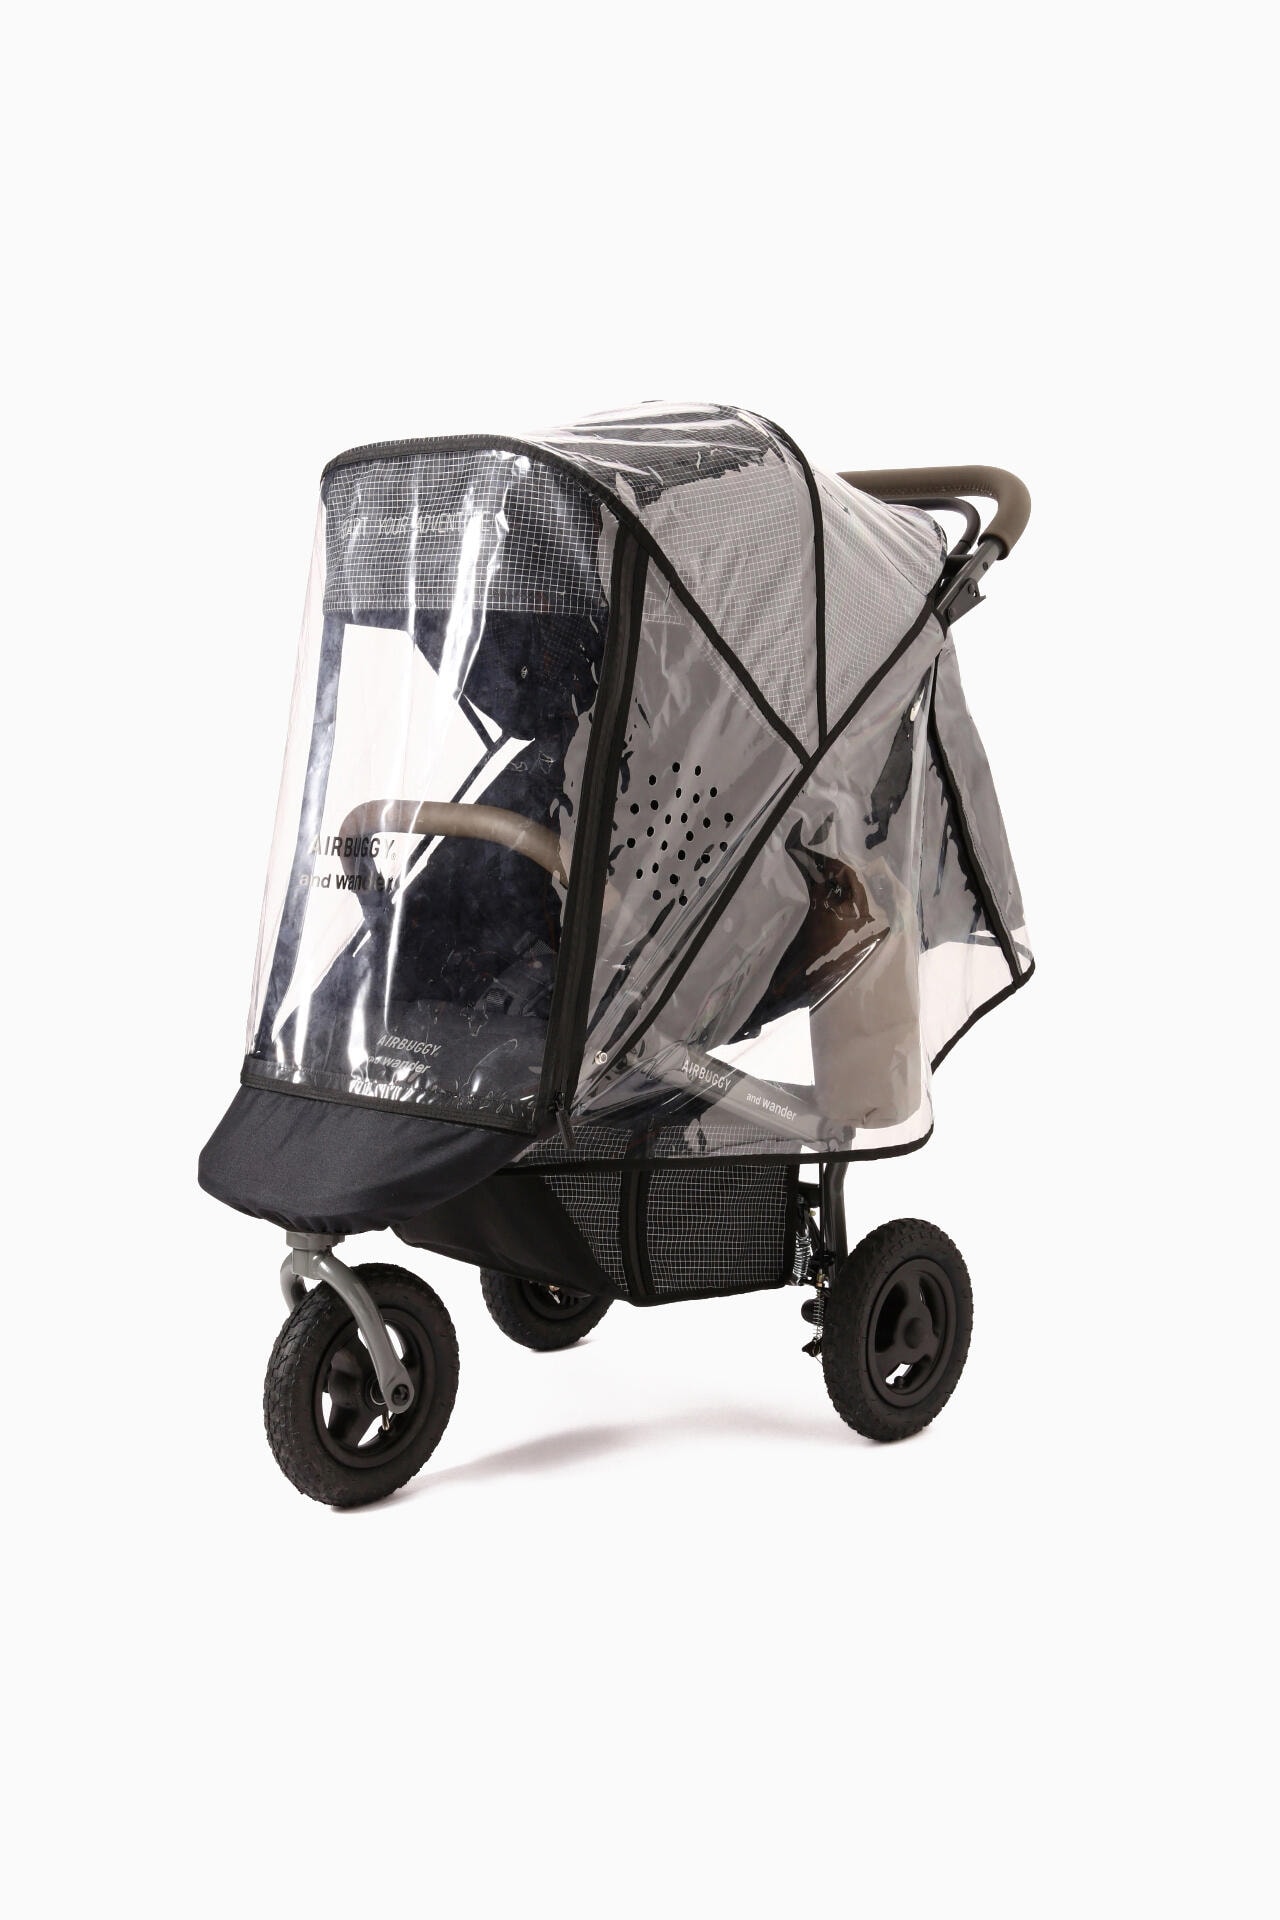 AIRBUGGY × and wander COCO BABY BUGGY | goods | and wander ONLINE 